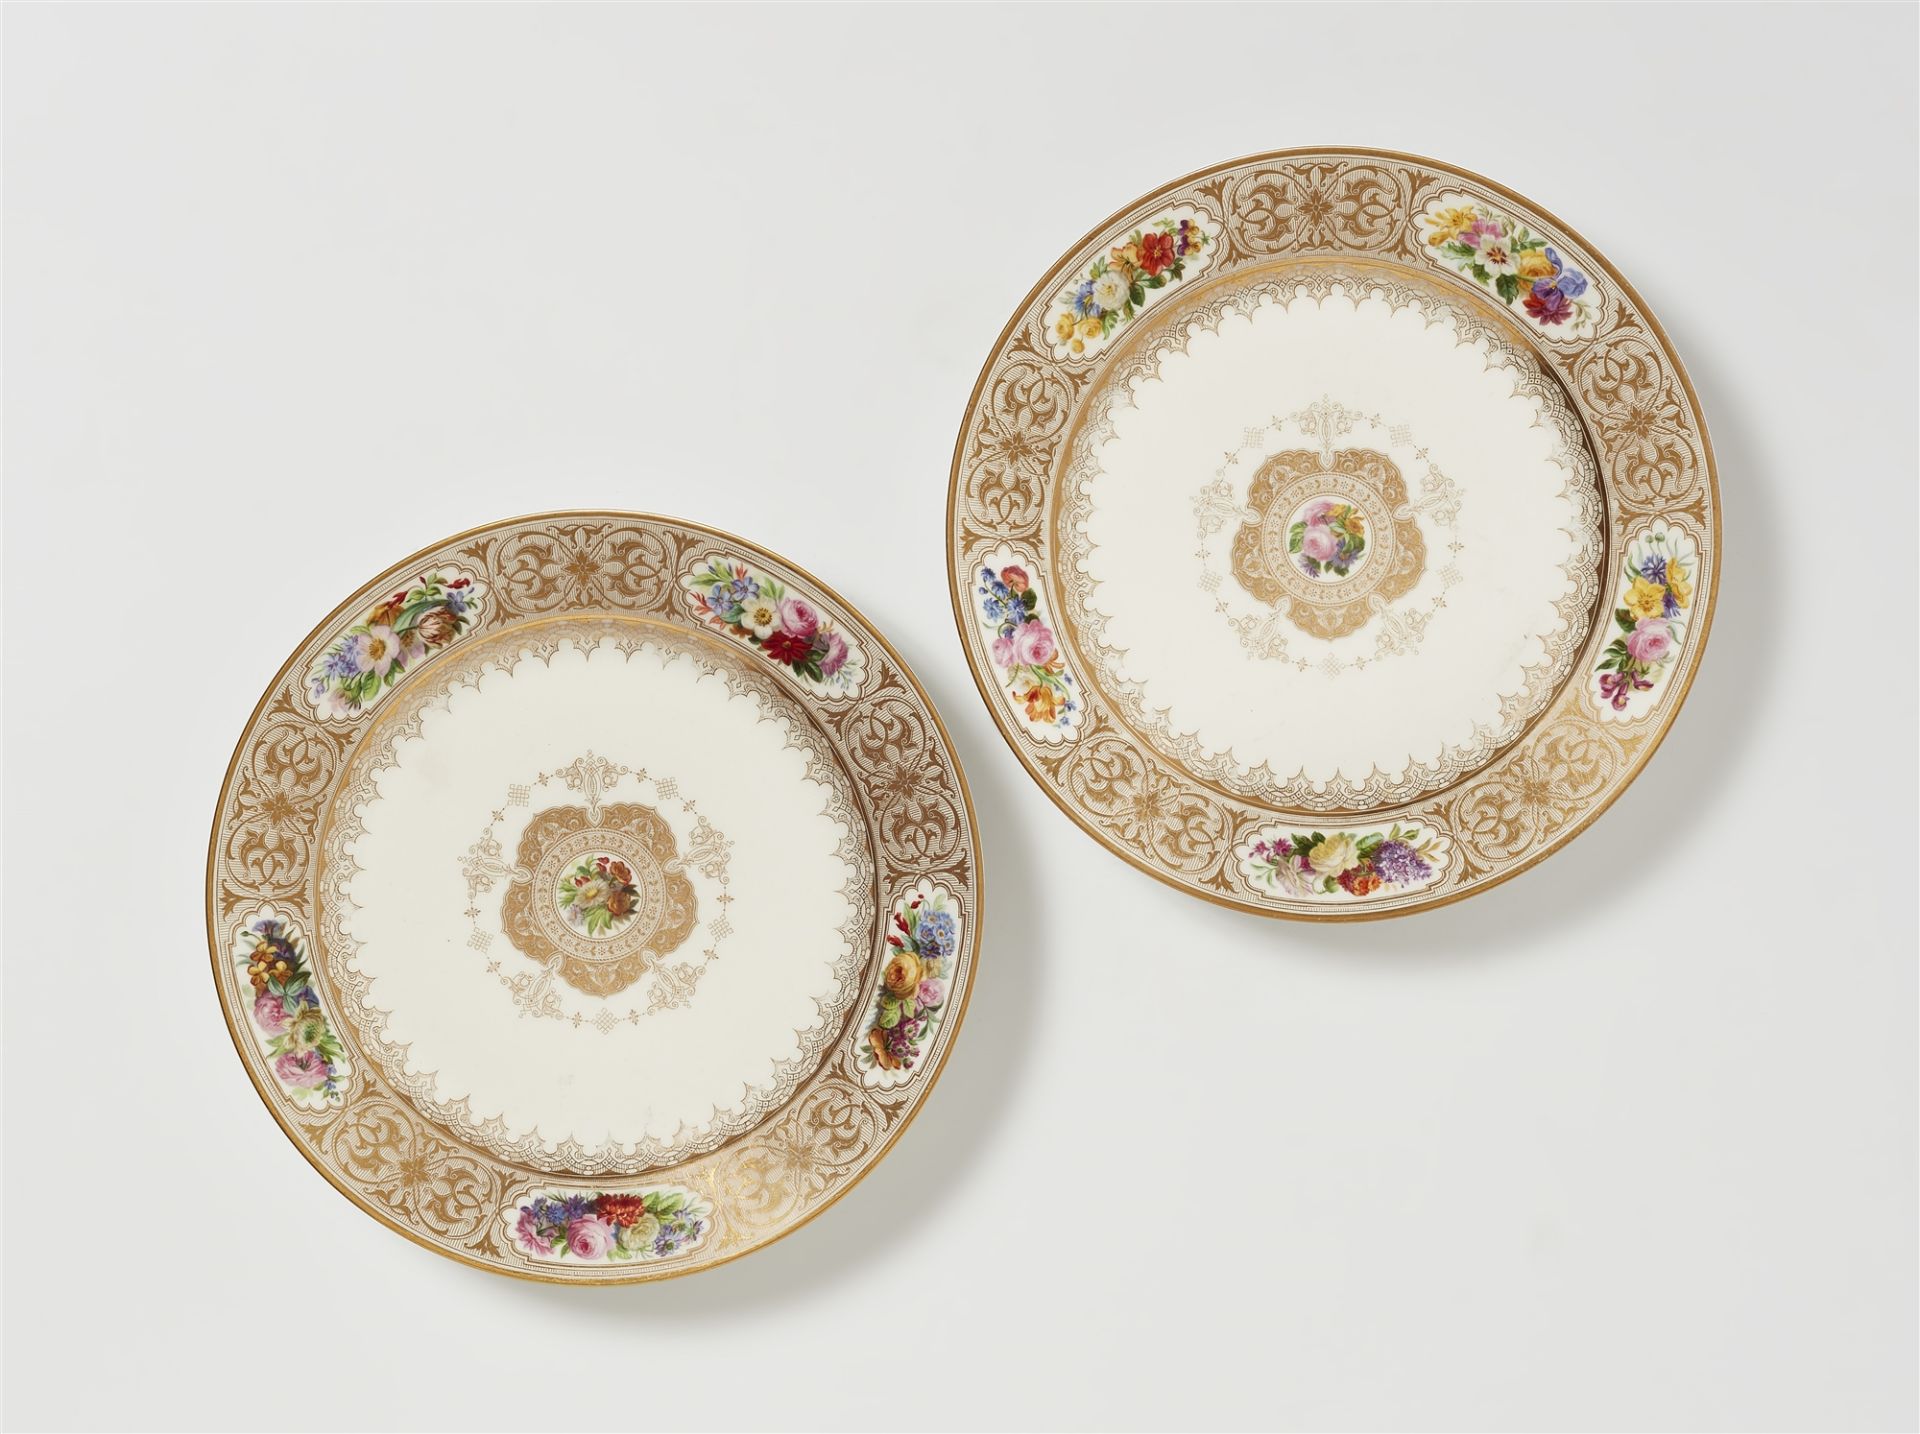 A pair of Sèvres porcelain plates from the dessert service for the Château de Trianon